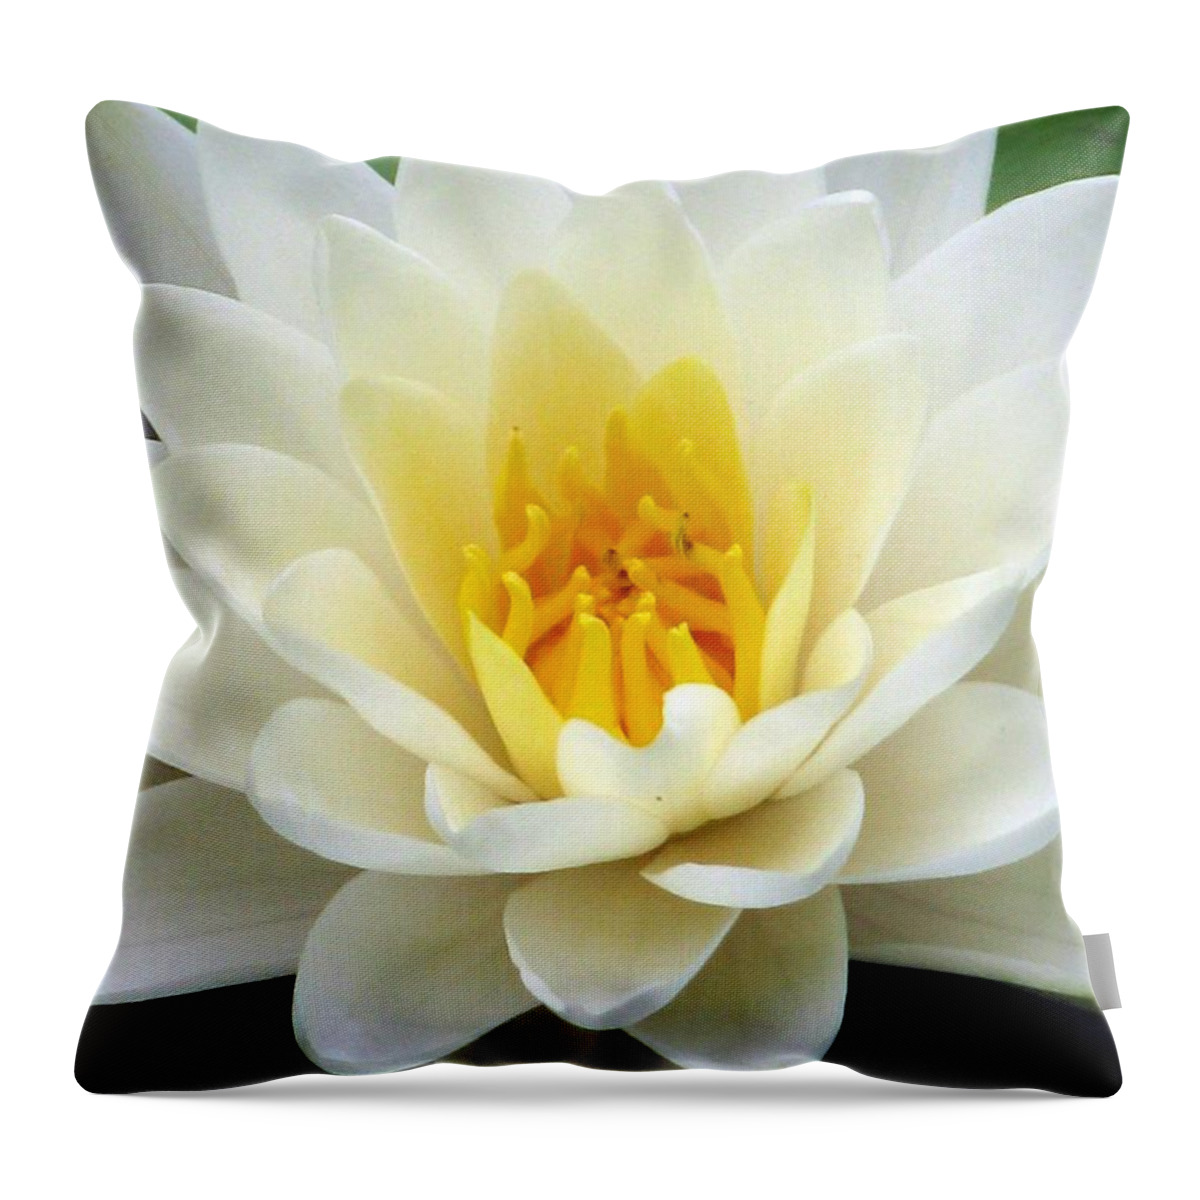 Water Lilies Throw Pillow featuring the photograph The Water Lilies Collection - 03 by Pamela Critchlow